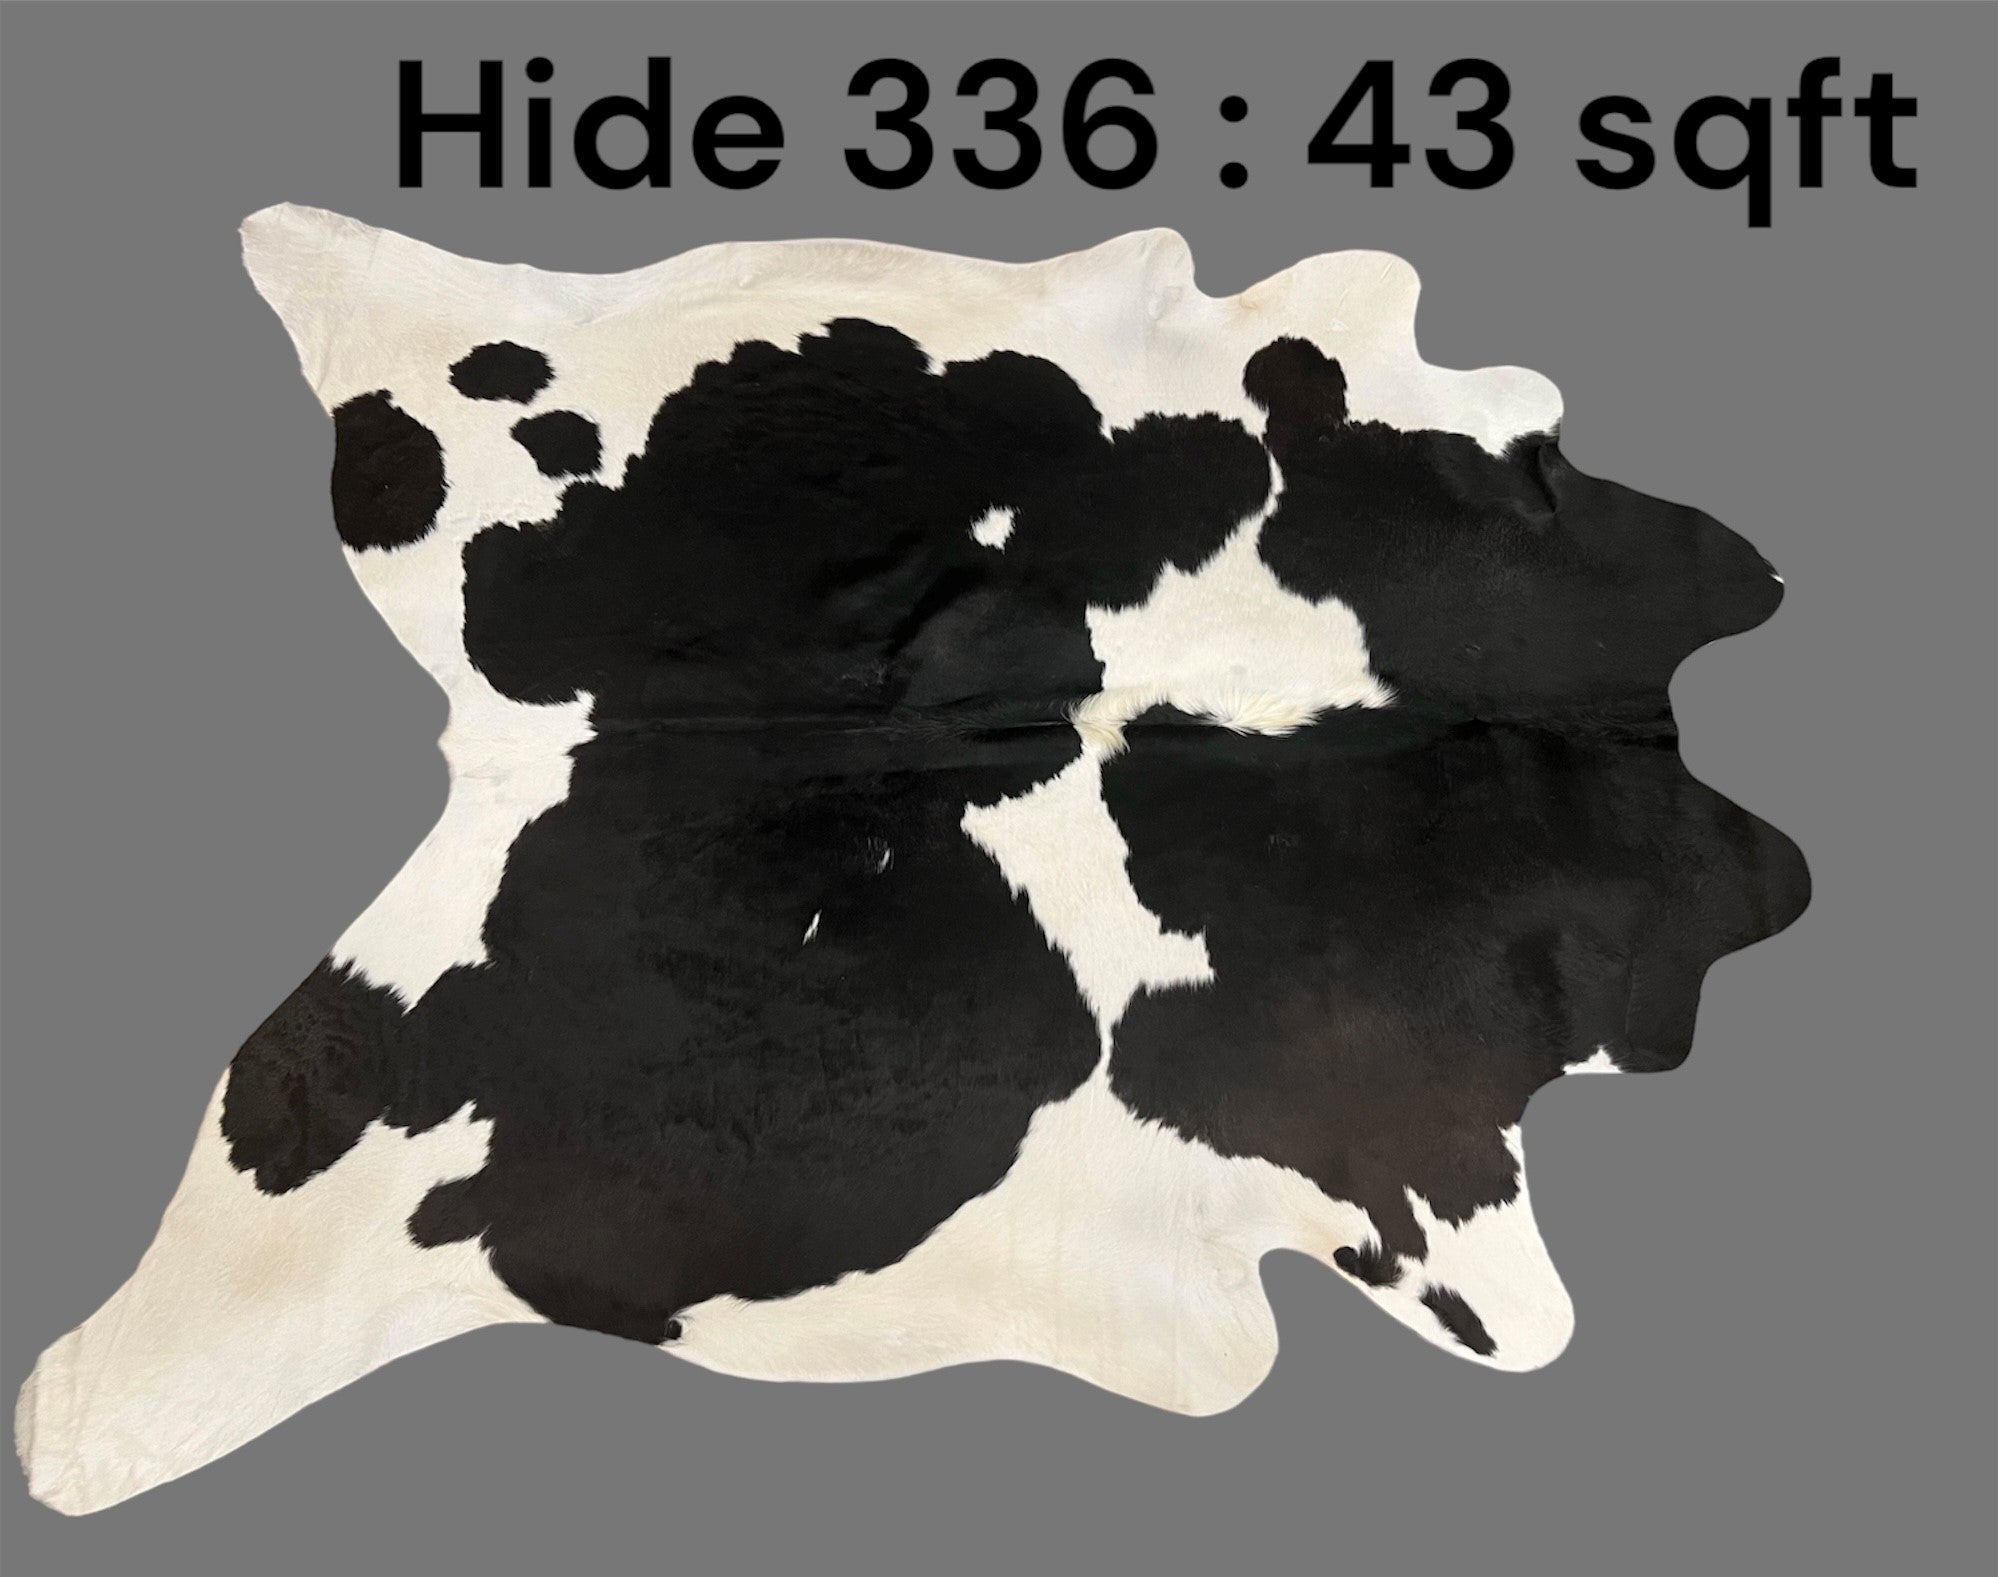 Natural Hair On Cow Hide : This Hide Is Perfect For Wall Hanging, Leather Rugs, Leather Upholstery & Leather Accessories. (Hide336))